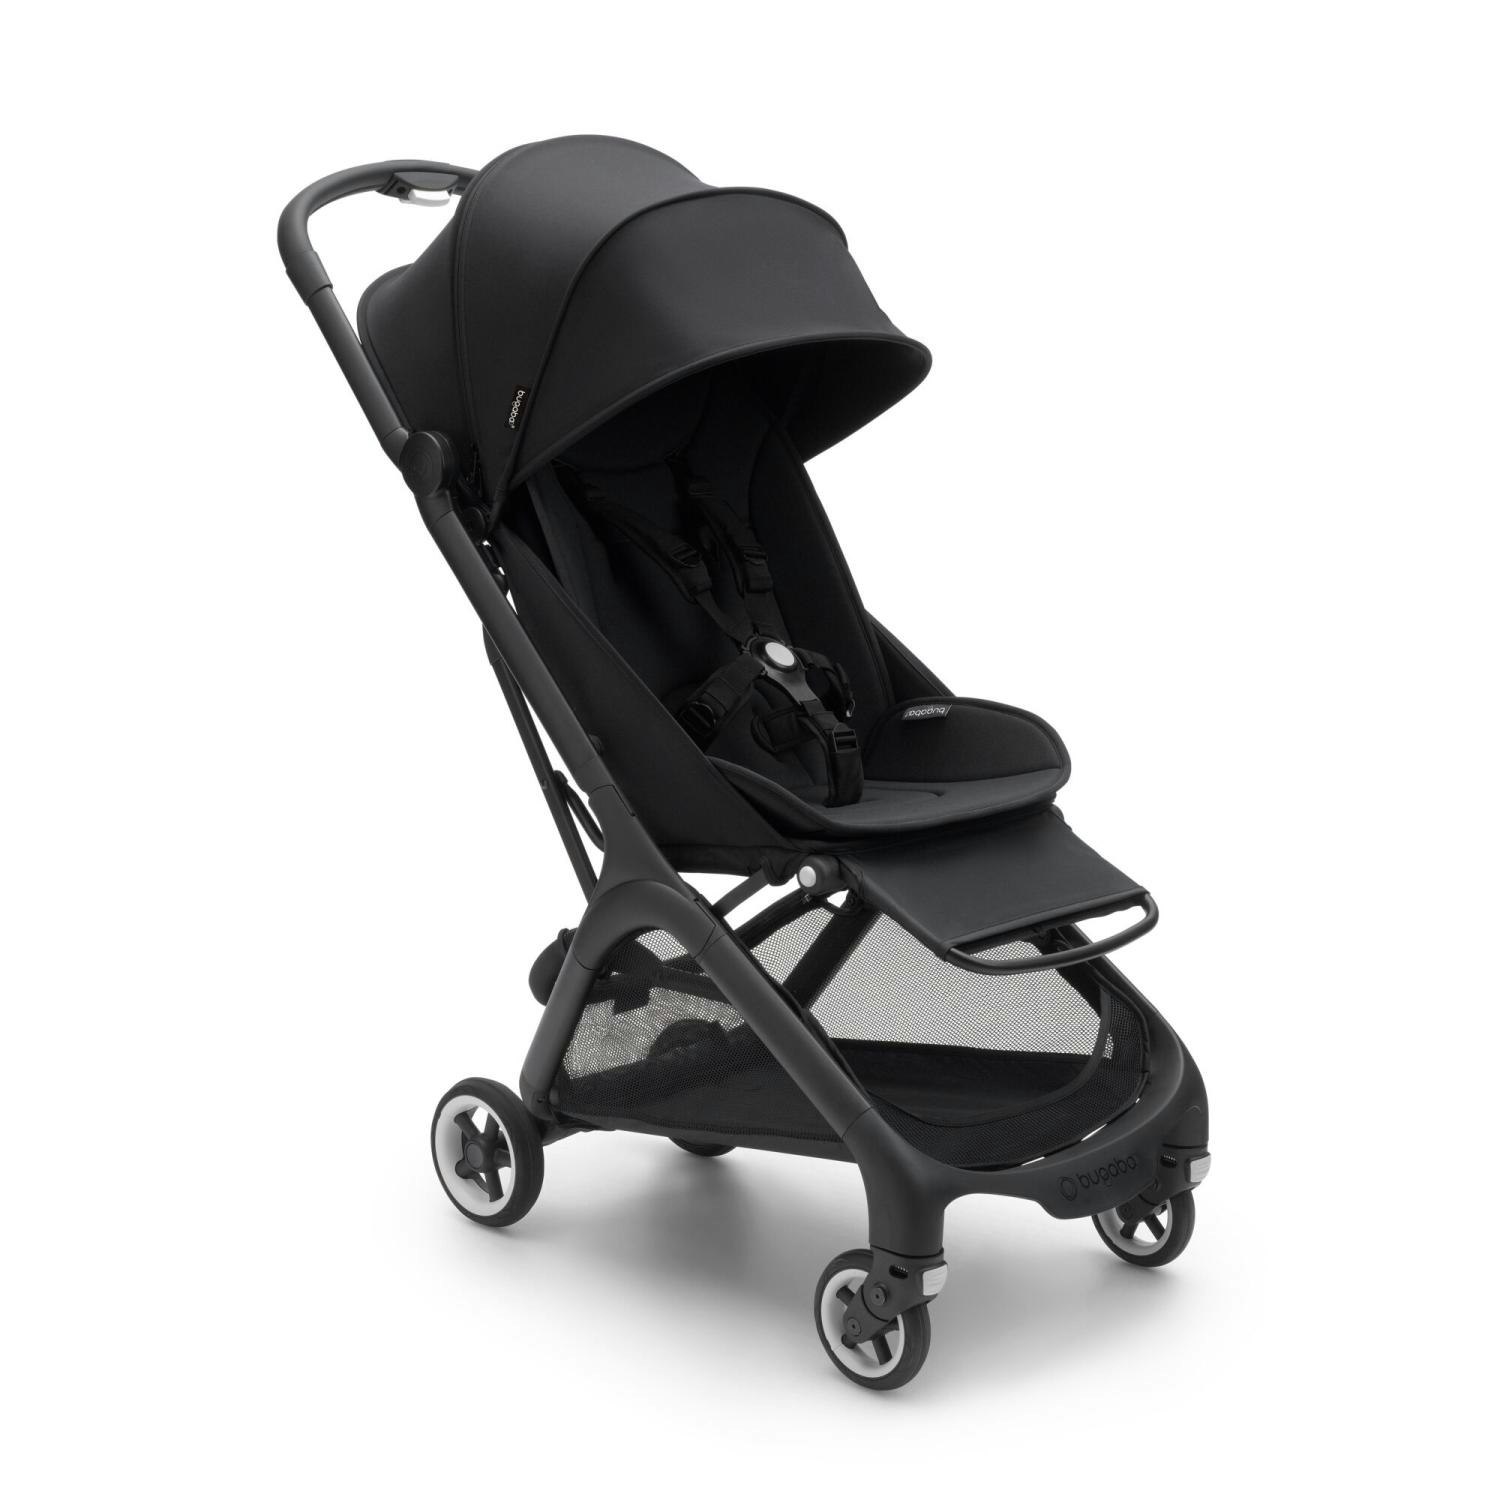 Bugaboo Butterfly Resevagn inkl. regnskydd.